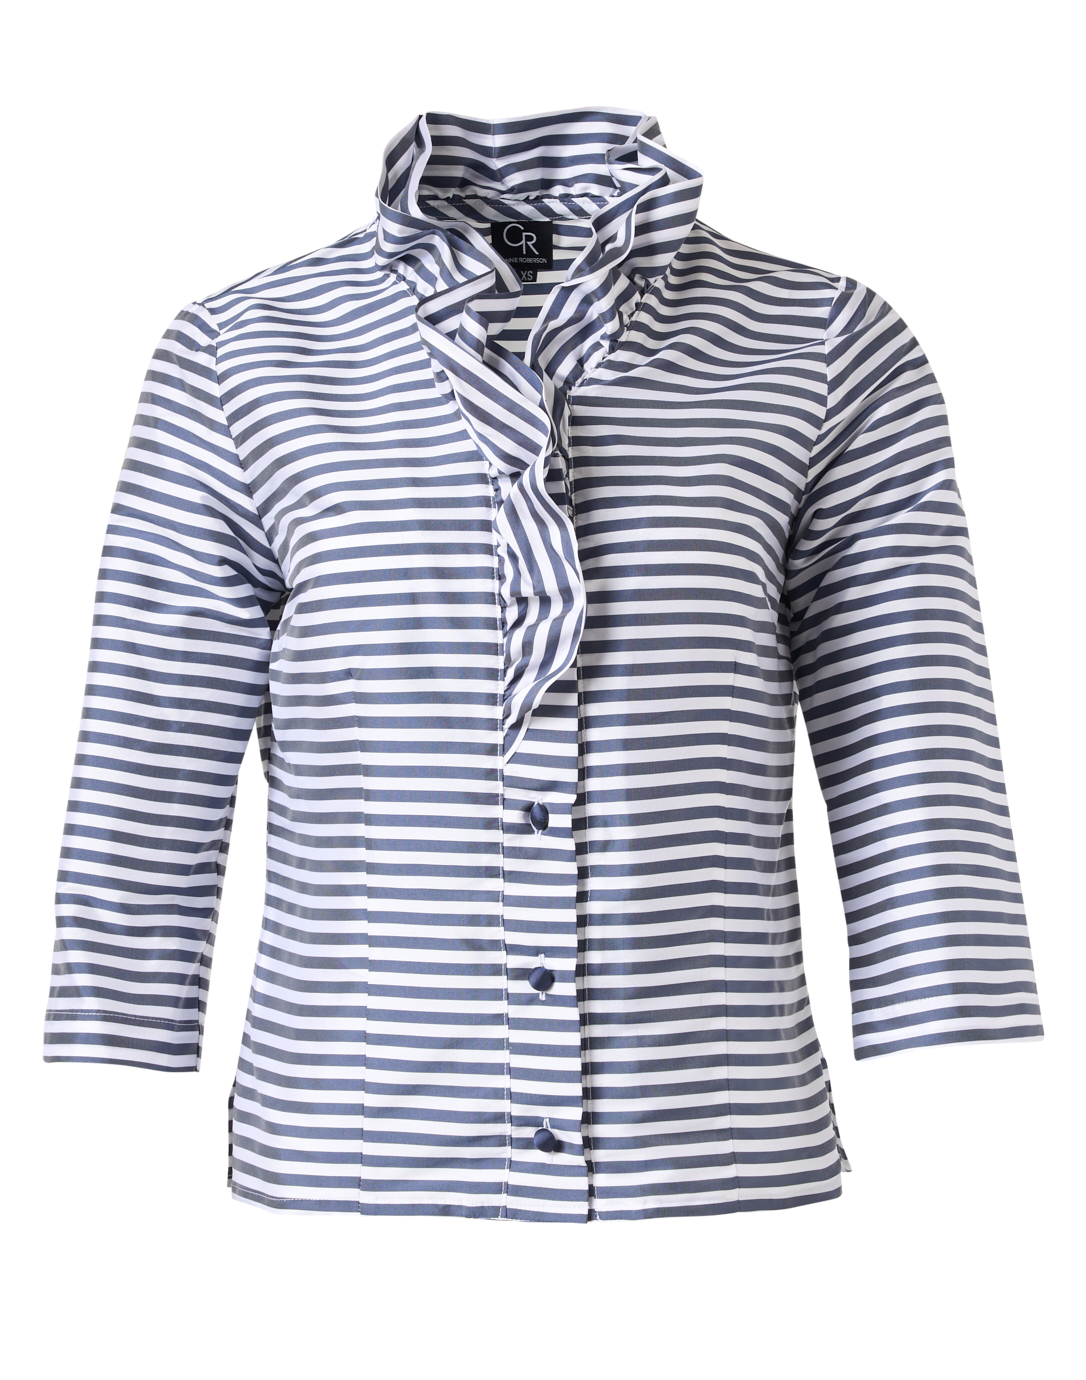 Collins Shirt - Stripe - White & Navy – Blowes Clothing